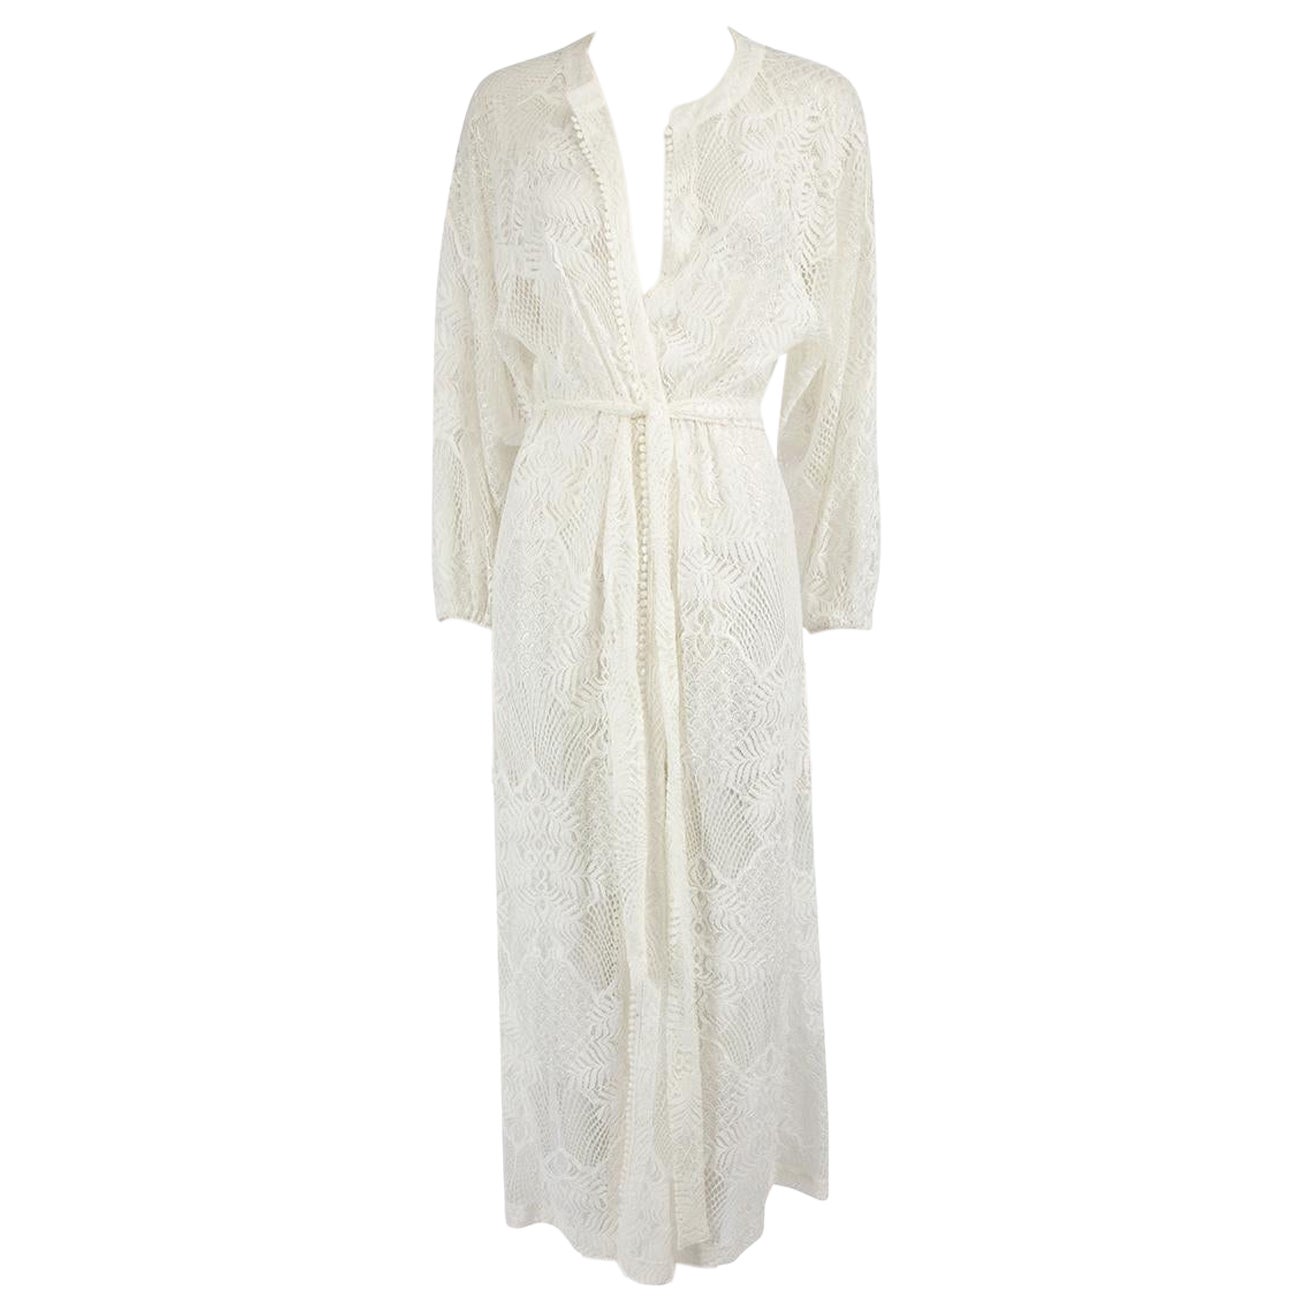 Melissa Odabash White Lace Beach Cover-Up Size M For Sale